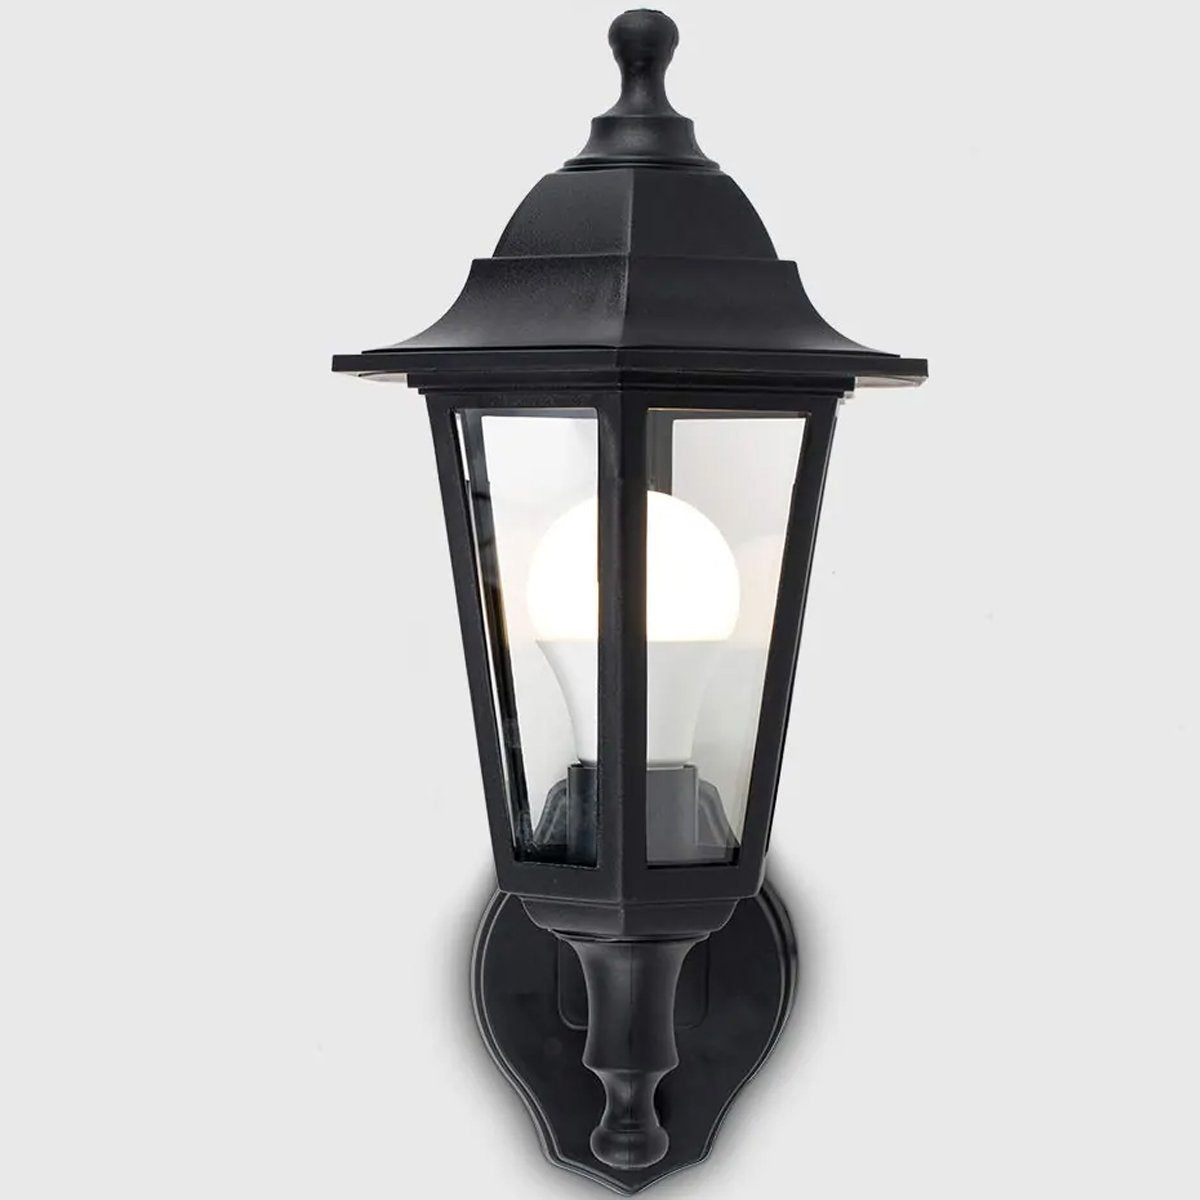  Traditional Vintage Coach Lantern design outdoor wall light with a built in motion sensor perfect for adding style and security  Our traditional front-door lantern in the form of our Adele Wall Light has the look of the traditional coach with the design to last. Made from durable rust proof polycarbonate body in matt black and constructed with fitted glass windows to show the bulb this is sure to add an statement to any wall 